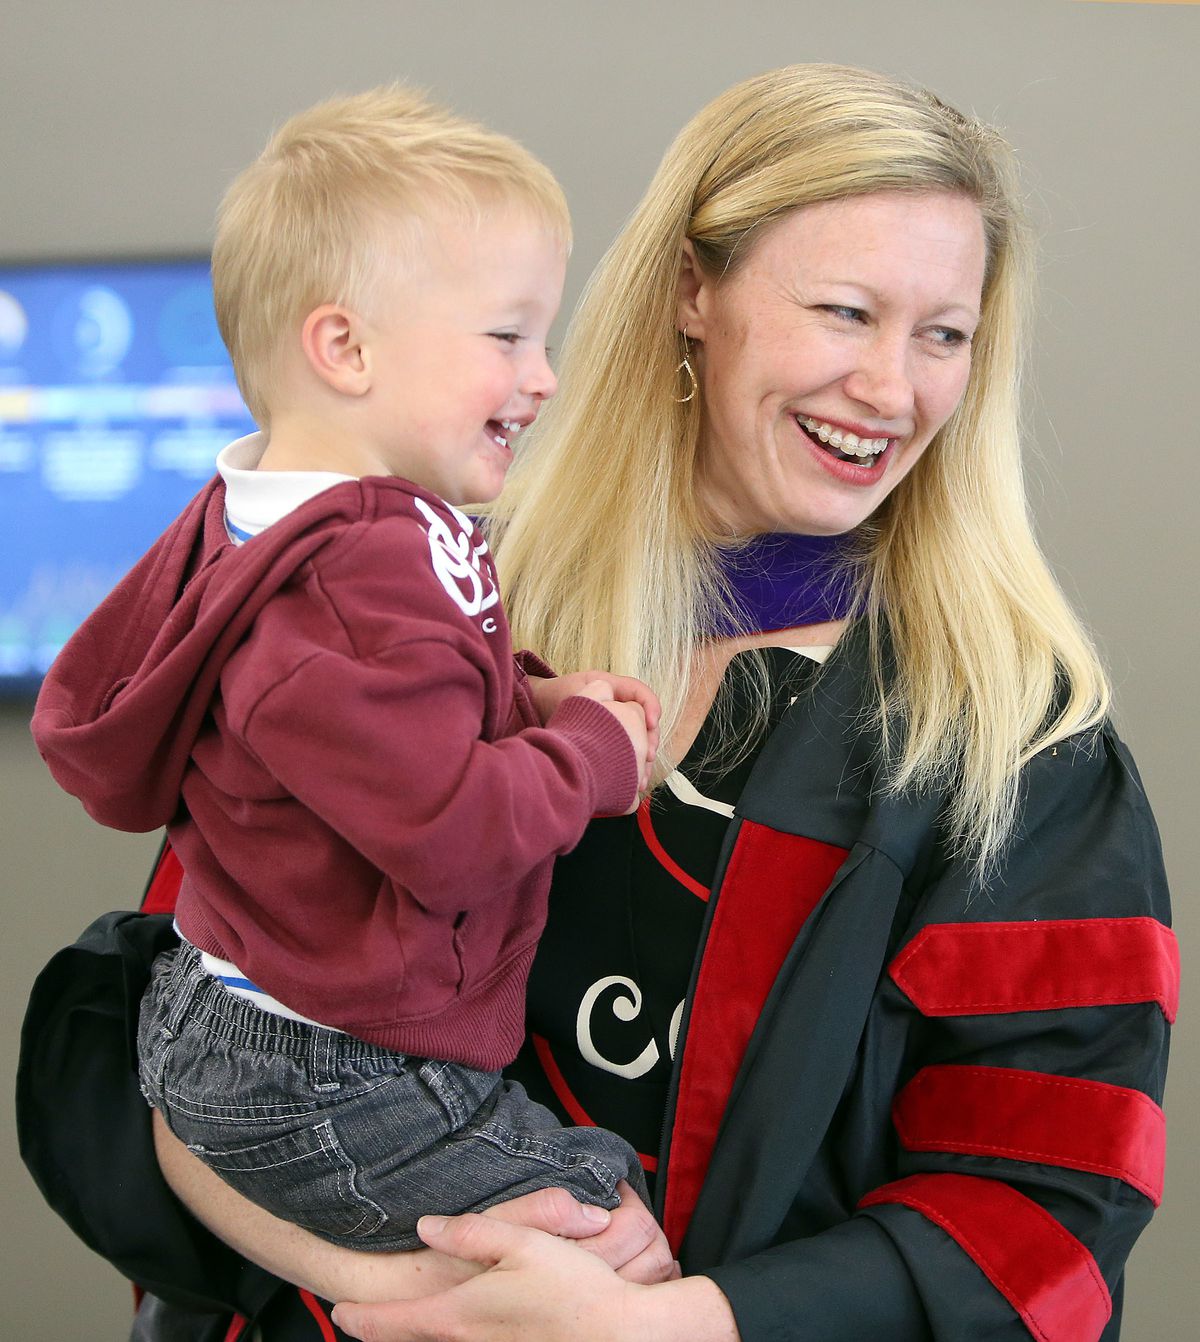 Kim Reeves holds son Gunnar at a commencement reception at the University of Utah's S.J. Quinney College of Law in Salt Lake City on Friday, May 11, 2018.